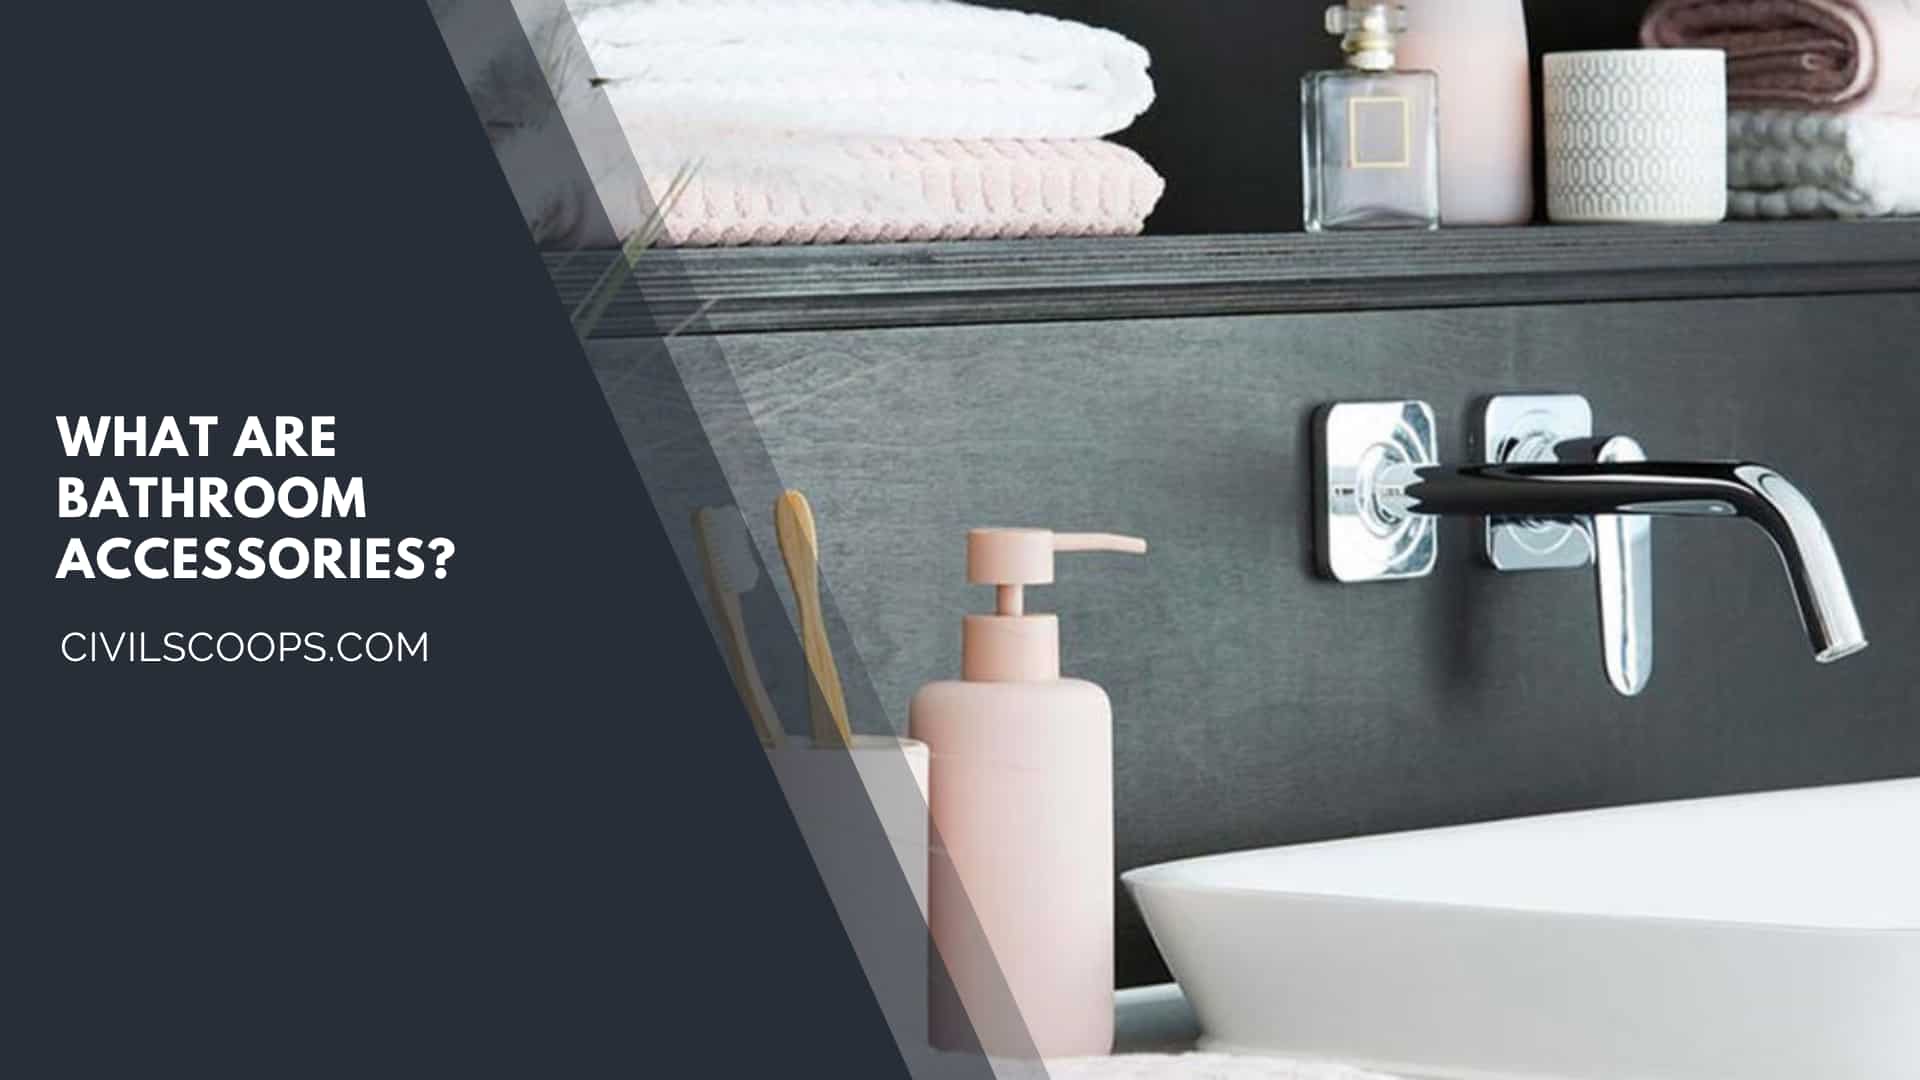 What Are Bathroom Accessories?